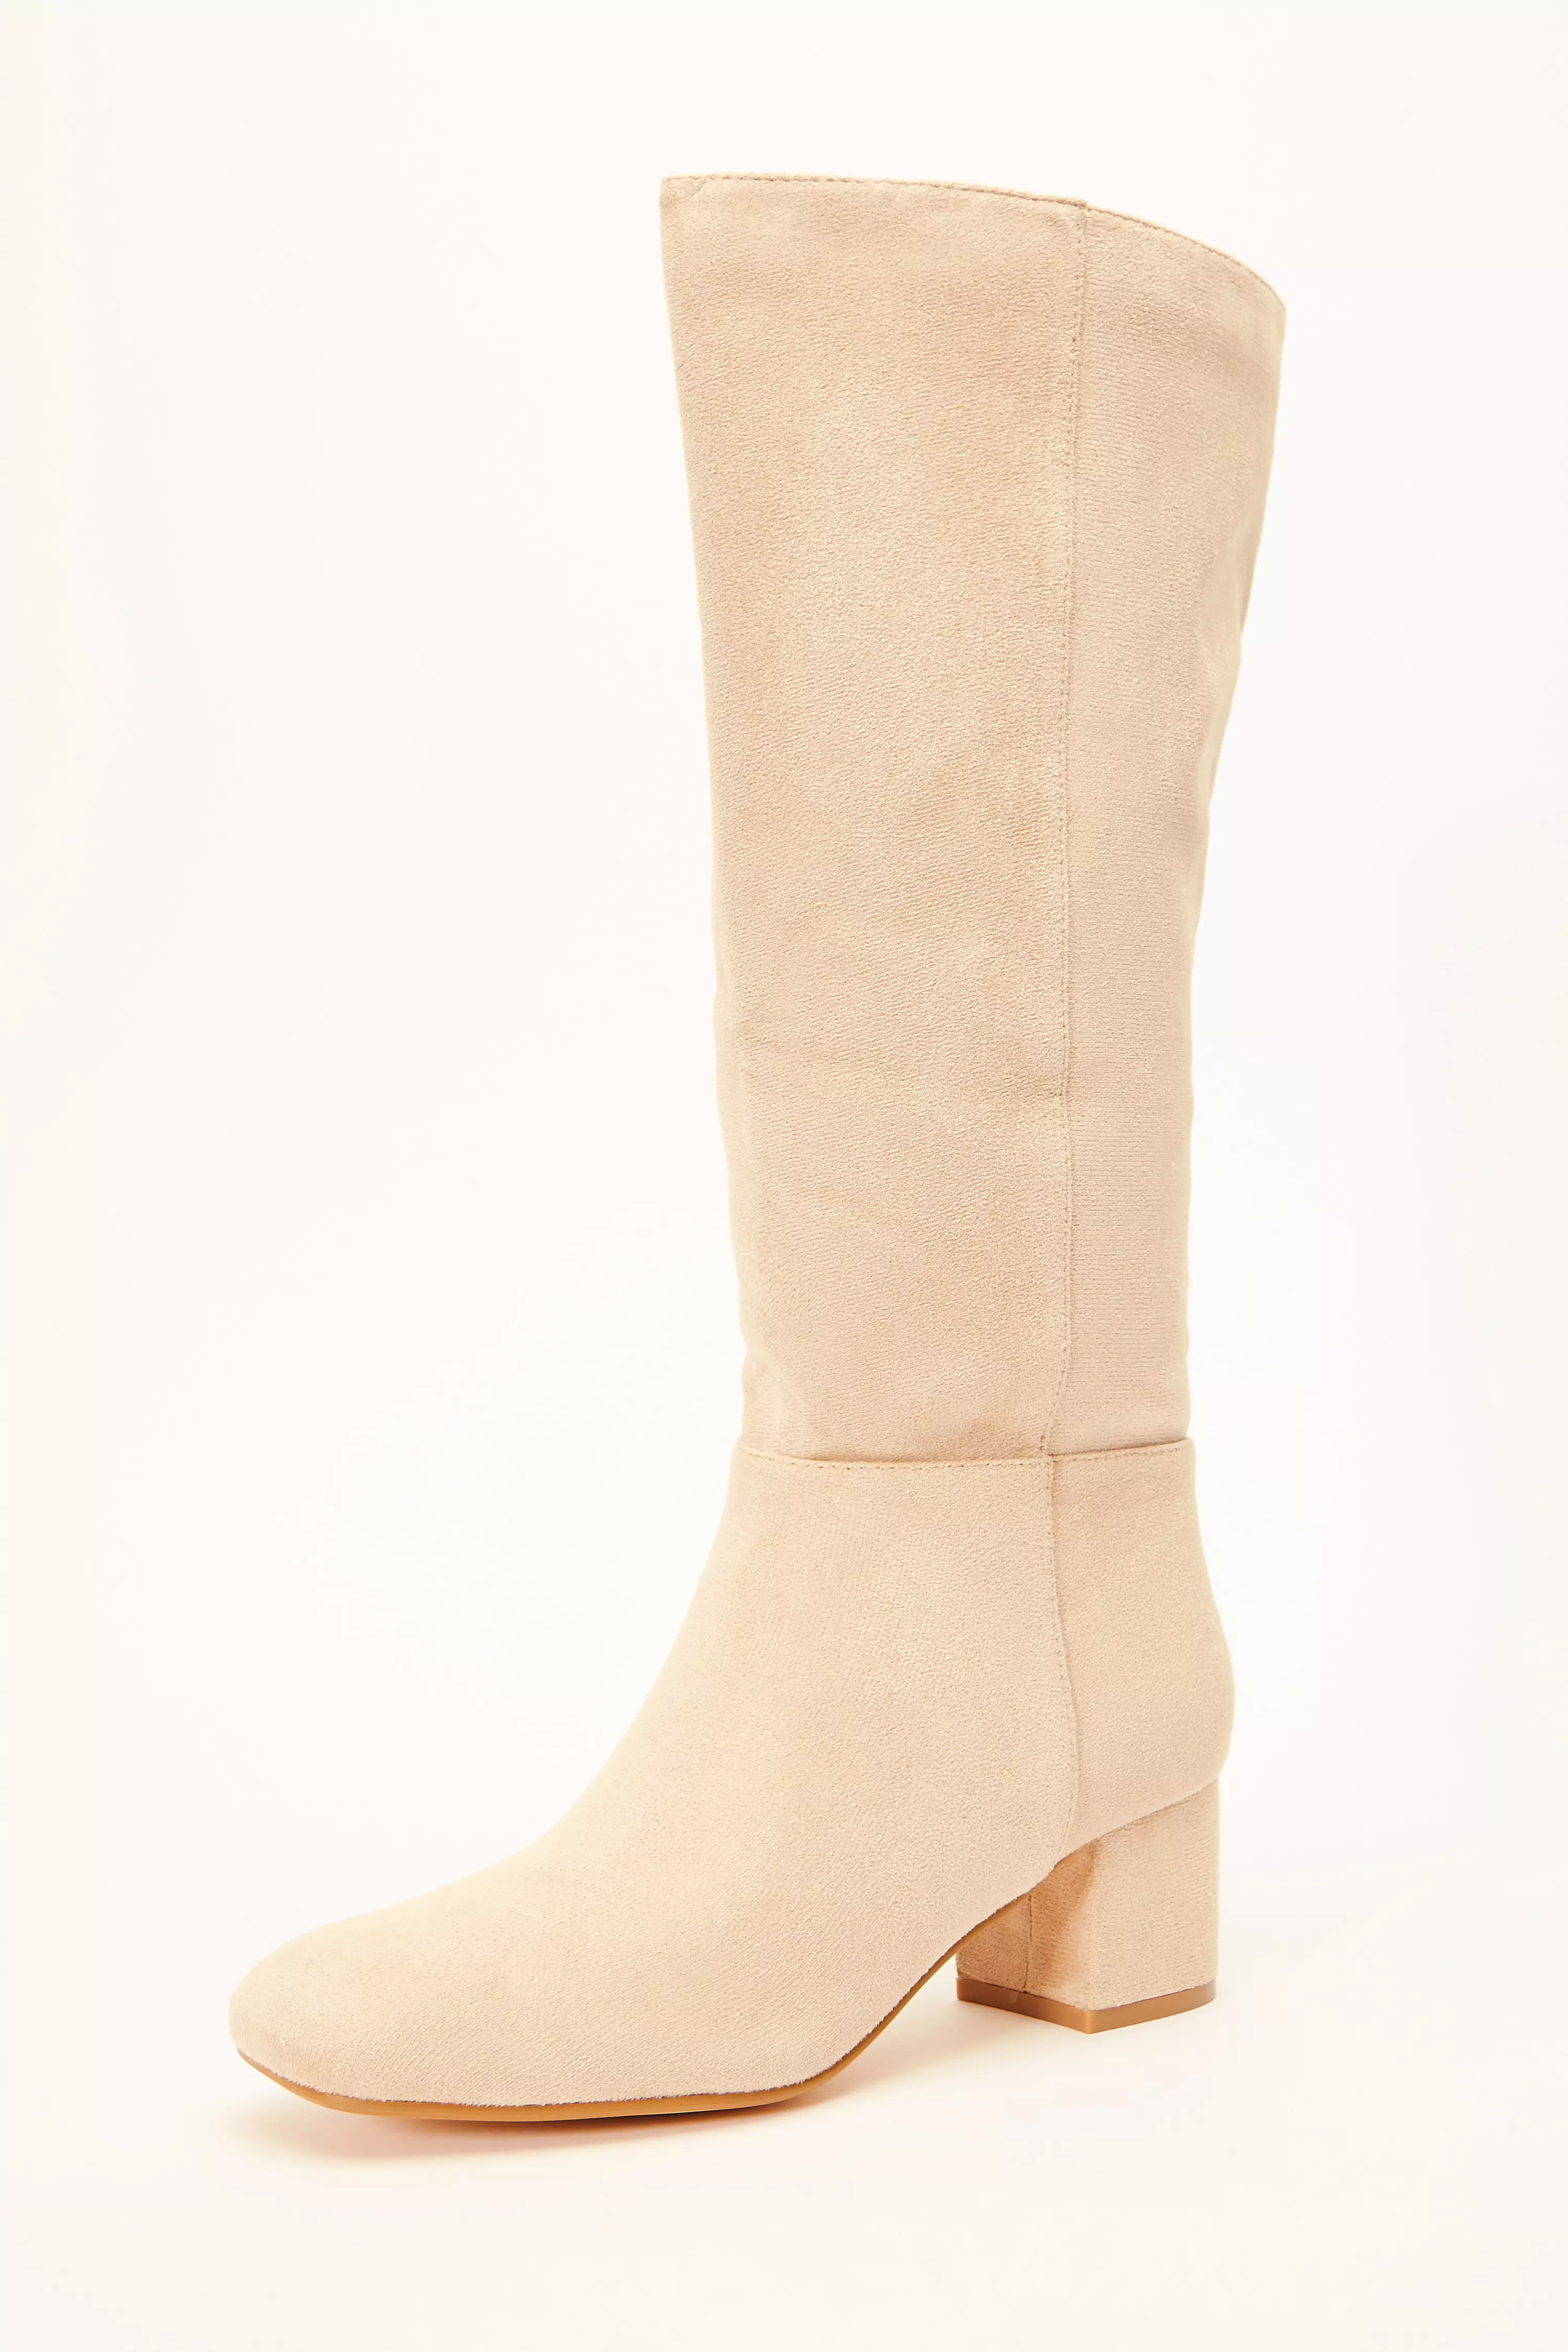 Cream Faux Suede Knee High Boots